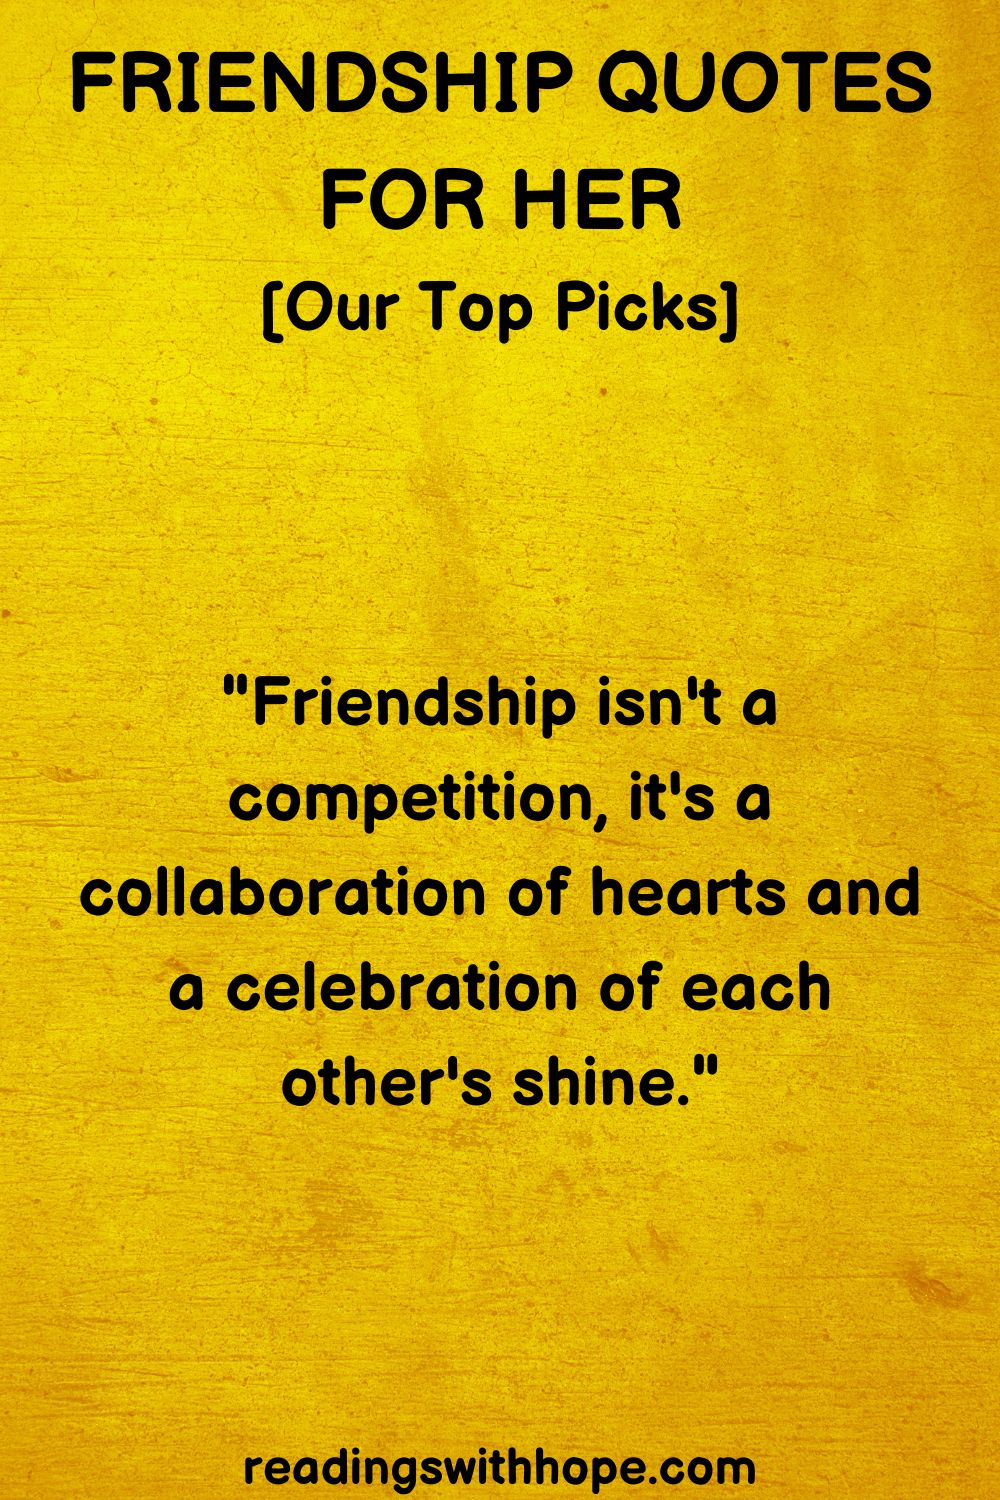 Friendship Quotes for Her